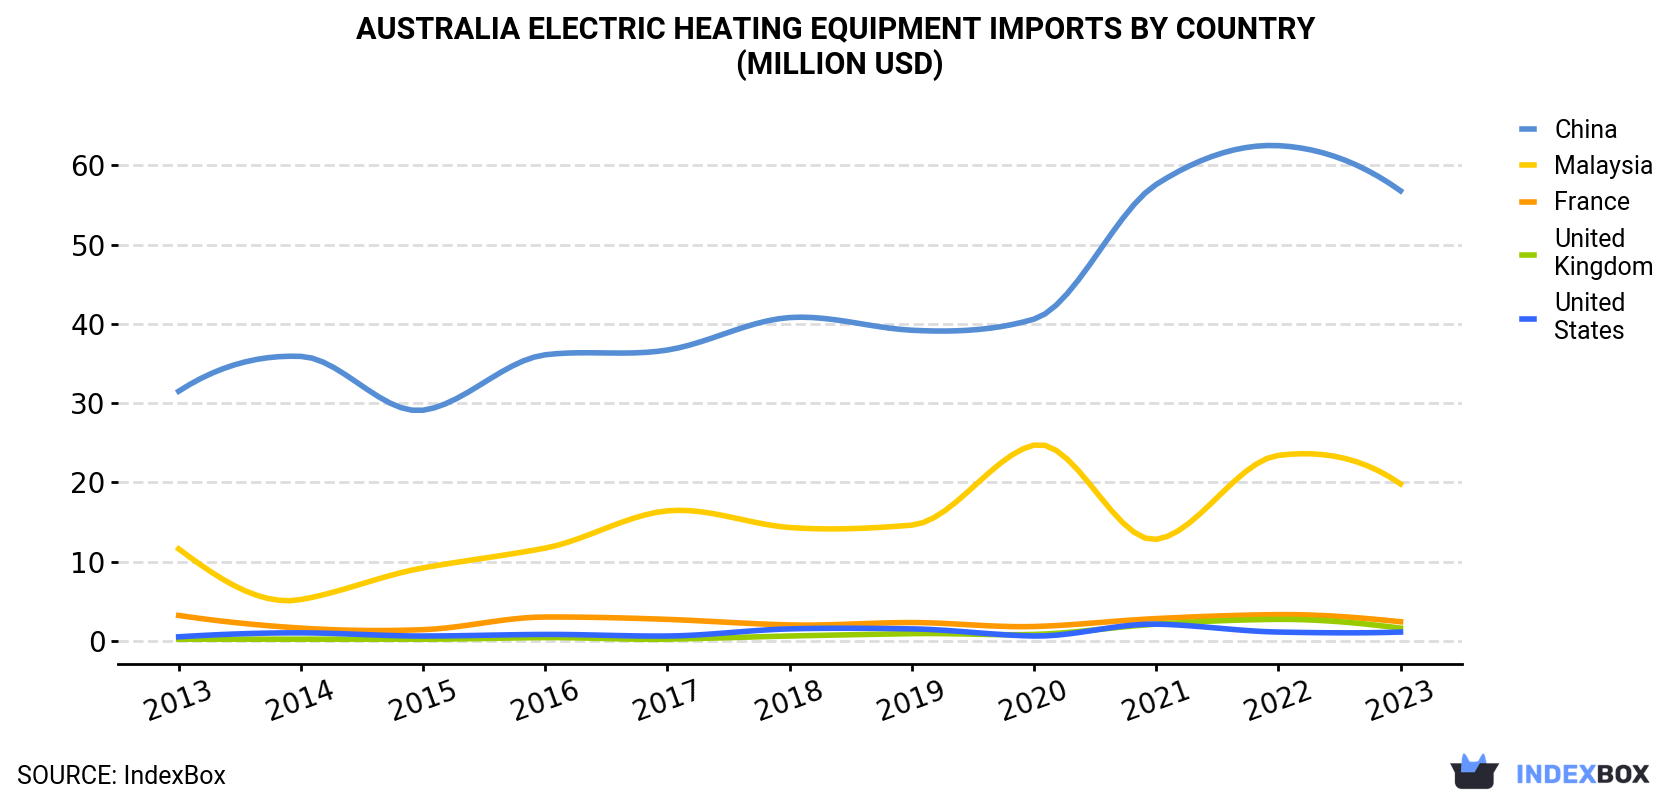 Australia Electric Heating Equipment Imports By Country (Million USD)